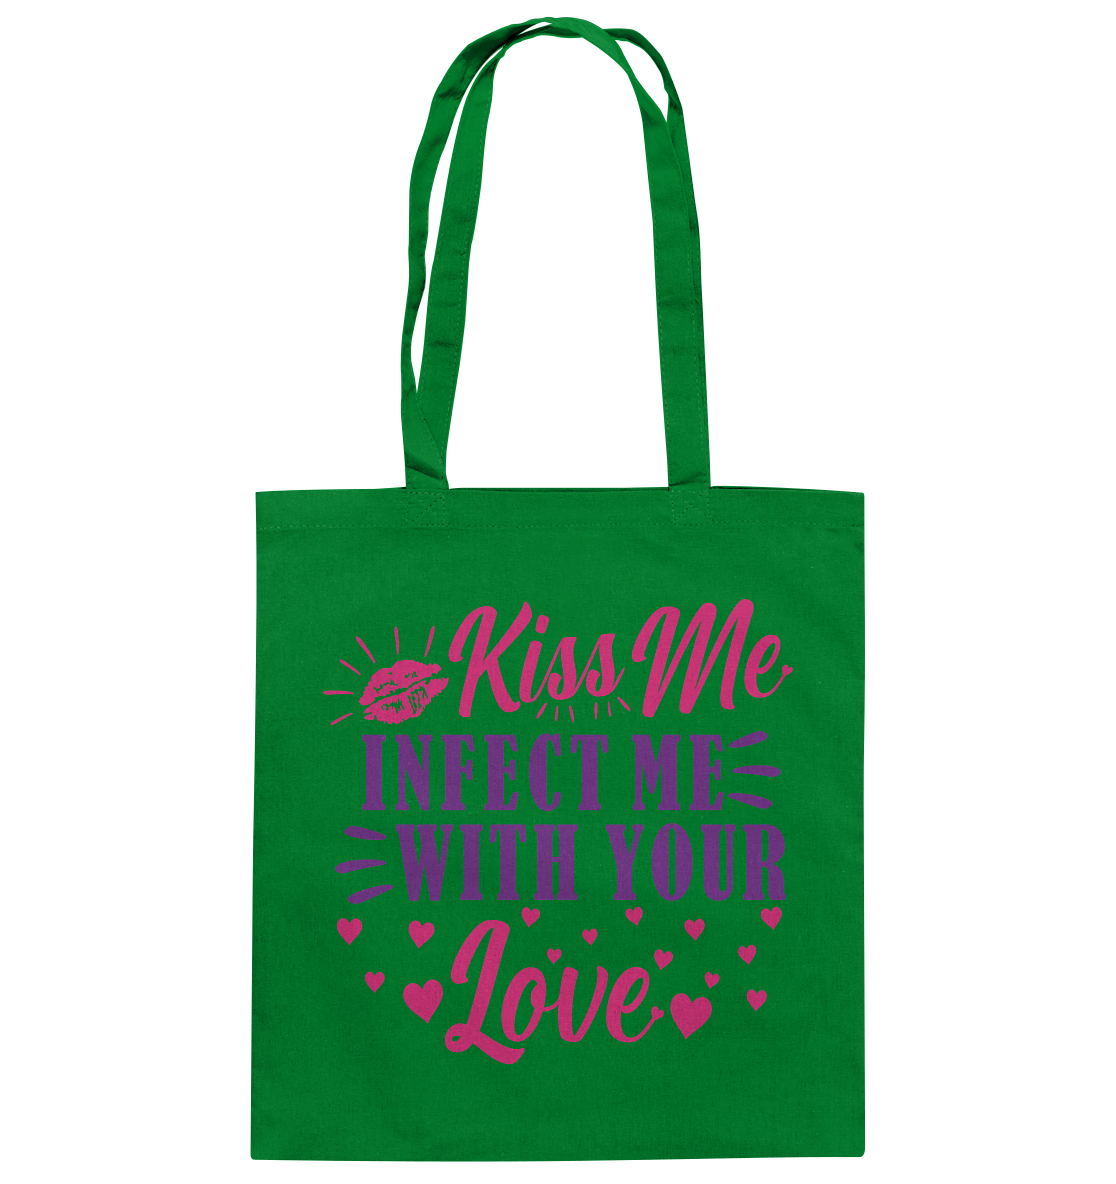 Kiss me infect me with your love - Baumwolltasche